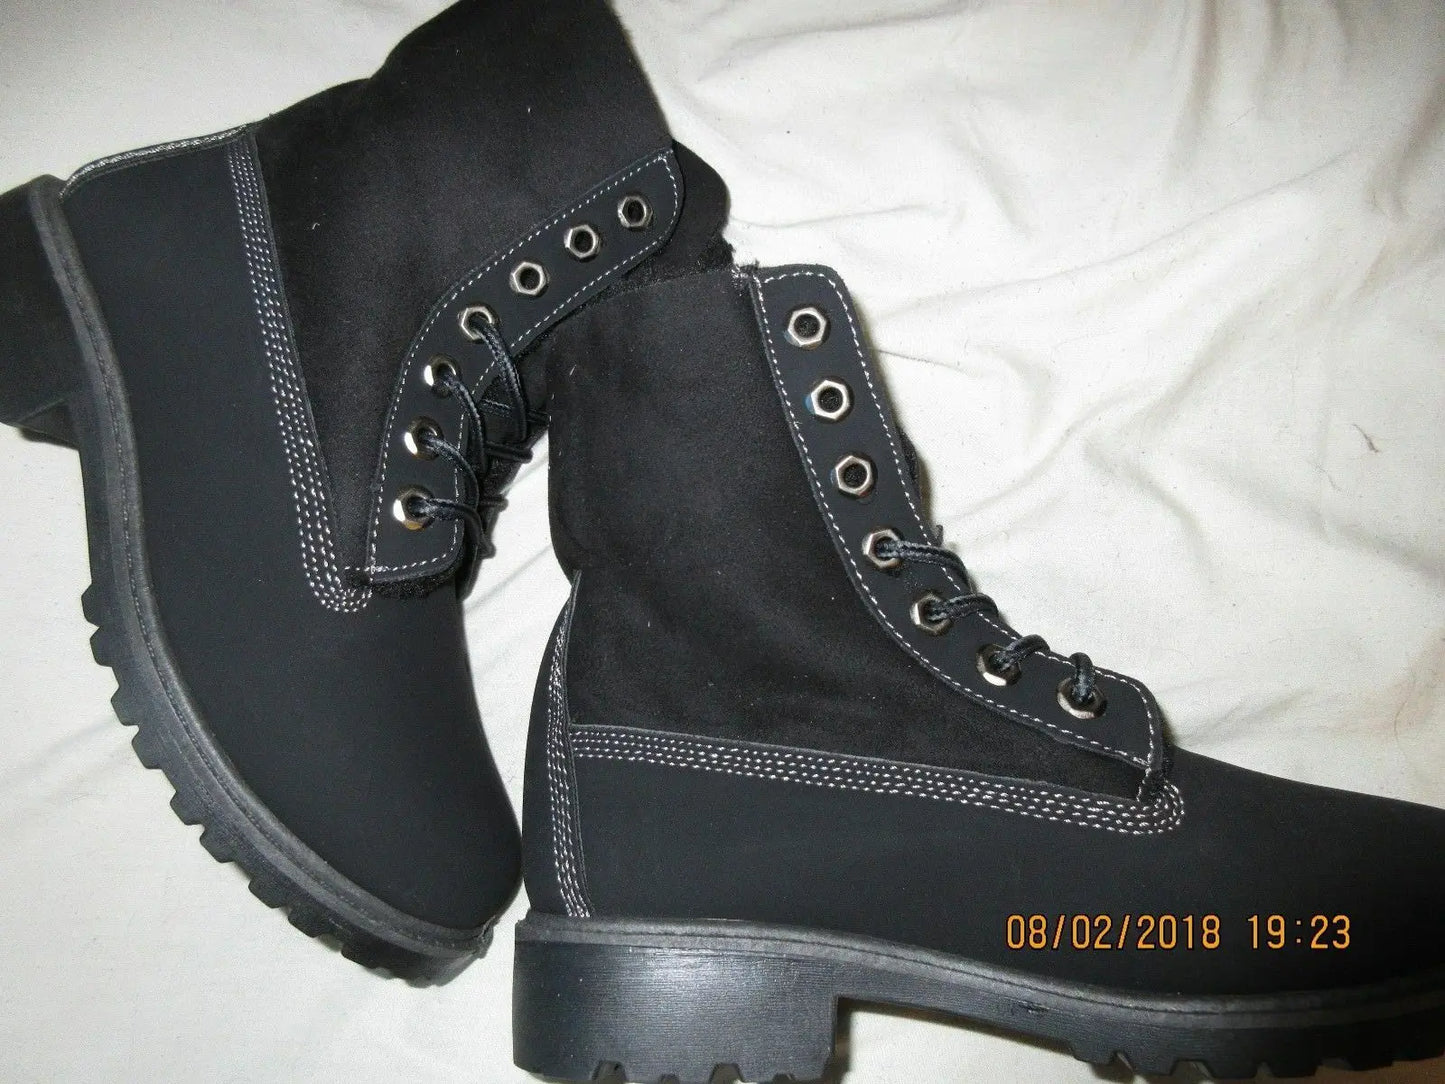 Ladies Black FAUX Fur-INNER Boots, LACE UP, WINTER WARM.VARIOUS SIZES. NEW Unbranded